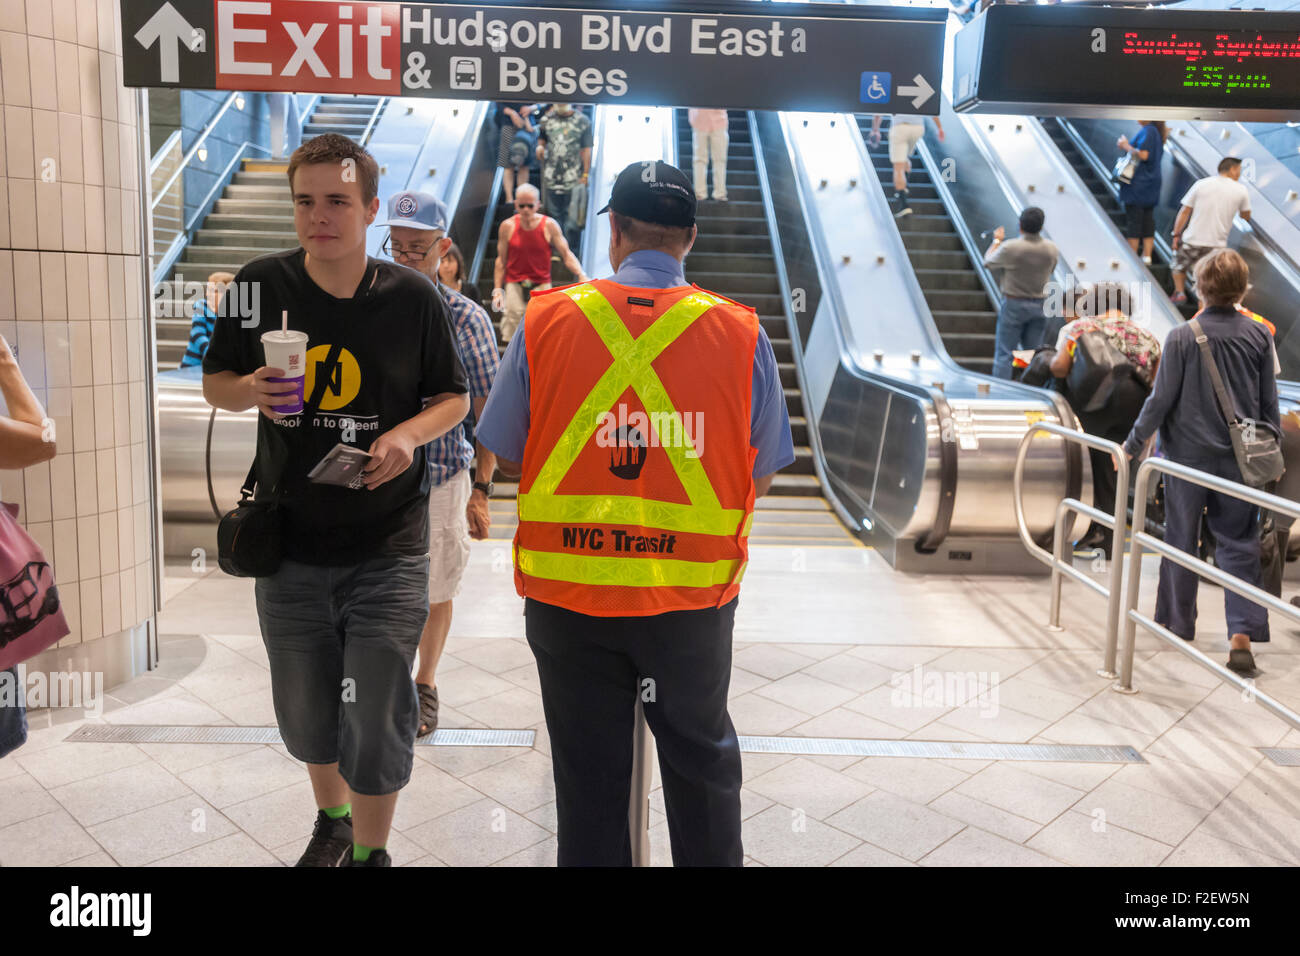 Visitors arrive in the new 34th Street-Hudson Yards terminal station on the 7 Subway line extension in New York on its grand opening, Sunday, September 13, 2015.  The new tunnel from Times Square  terminates 108 feet below street level at West 34th Street and Eleventh Avenue at the doorstep of the rezoned 45 block Hudson Yards development. It is the first subway station to open in 26 years and the first line extension in 60 years. (© Richard B. Levine) Stock Photo